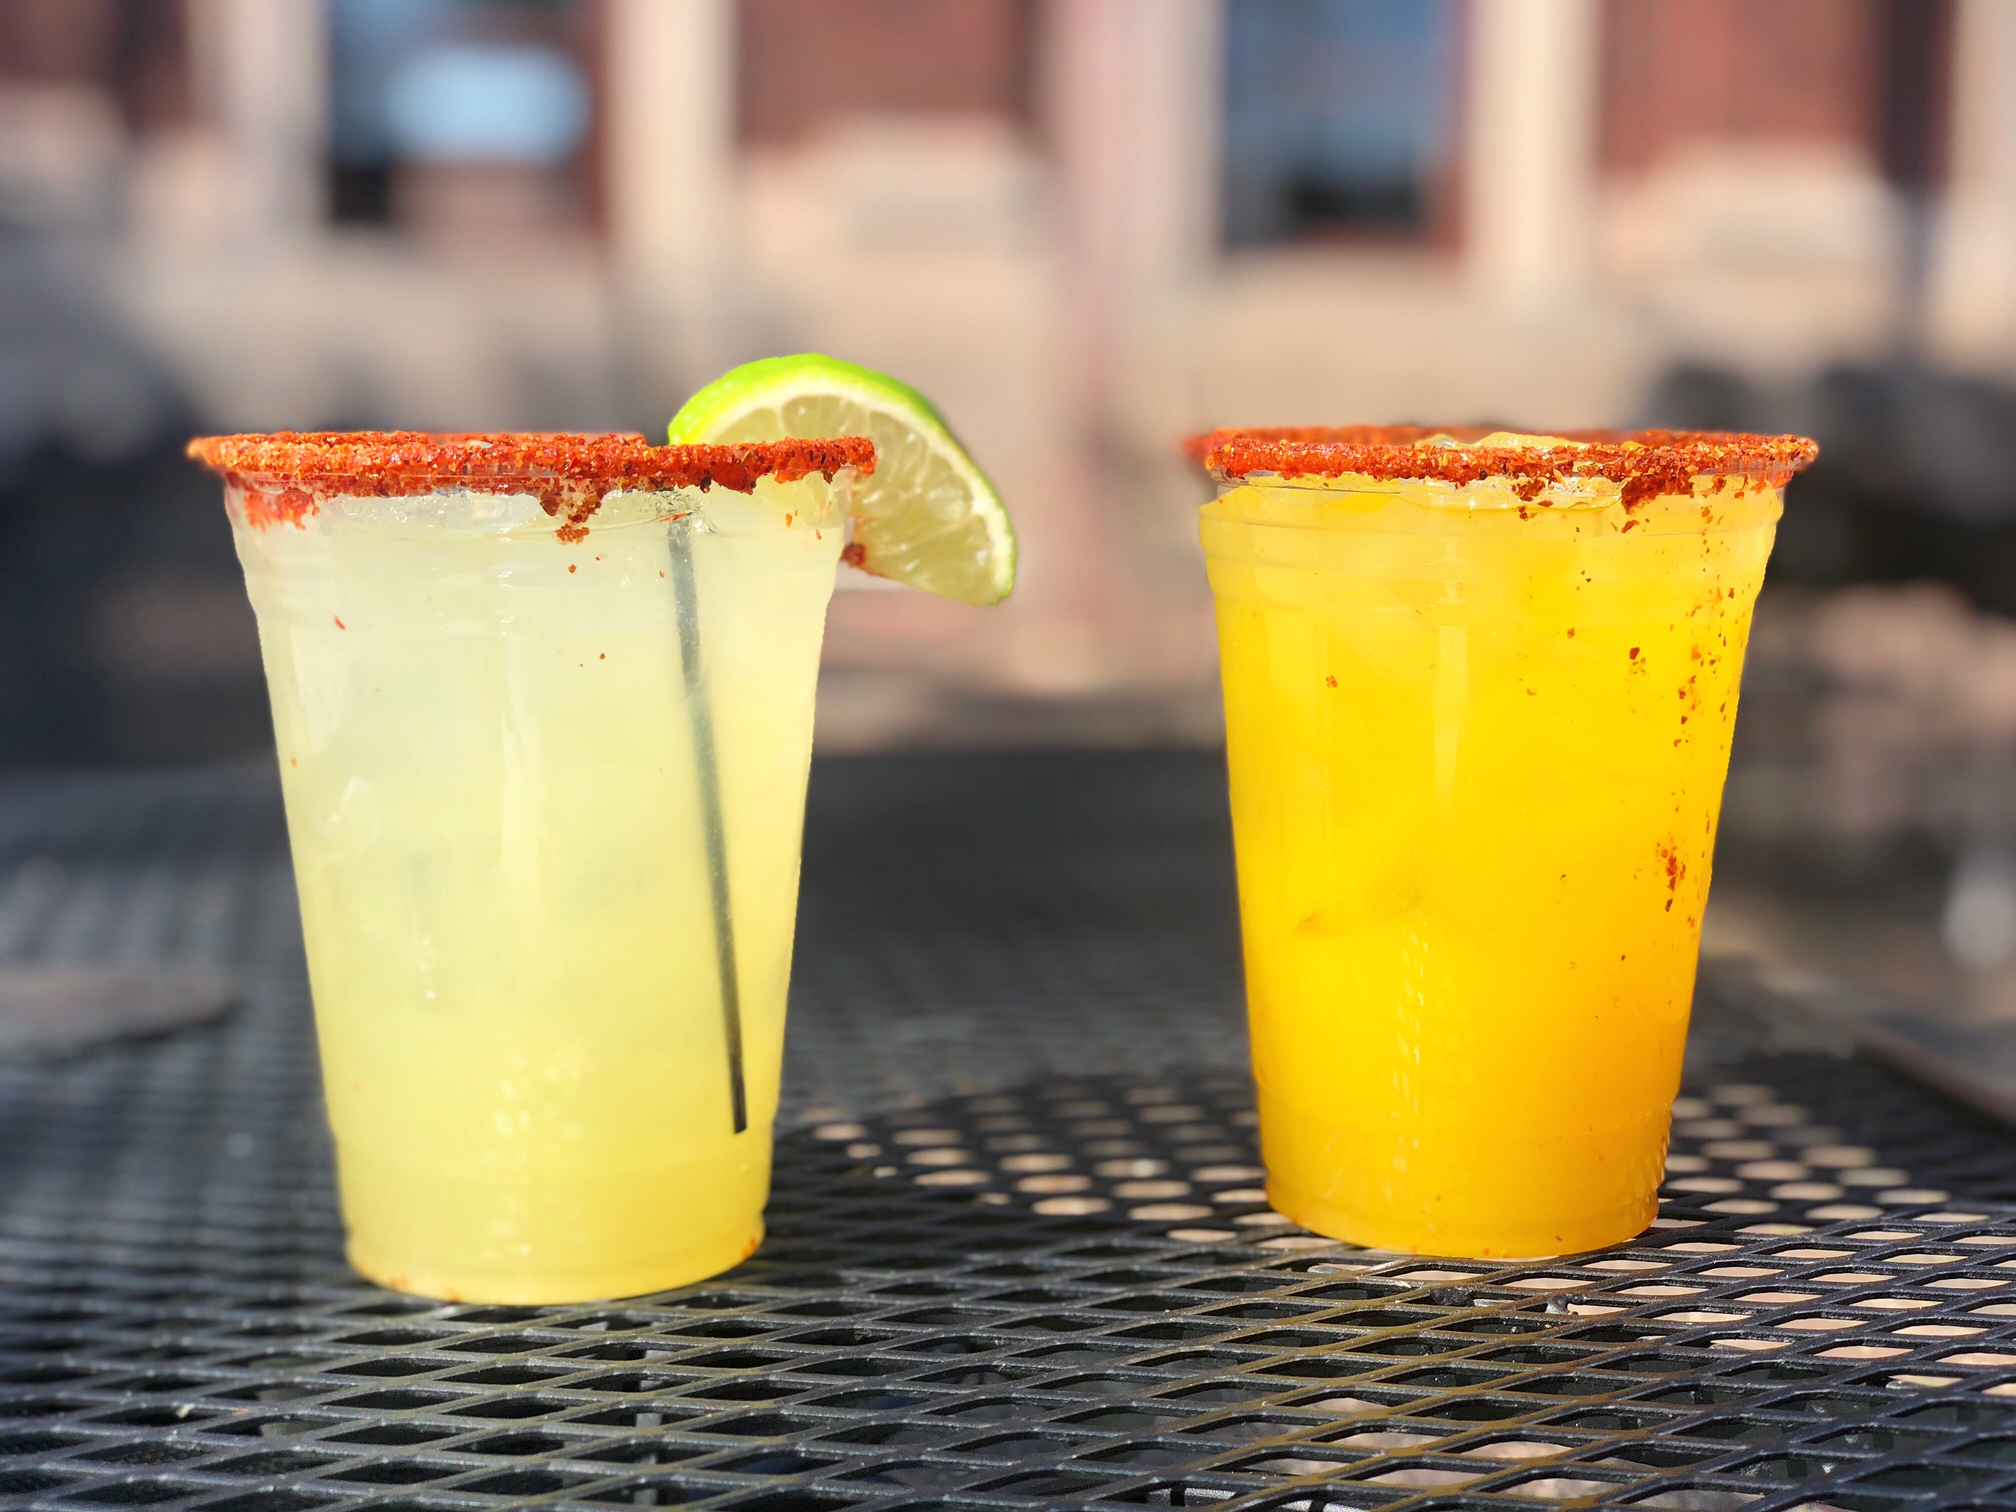 Two margaritas with tajin on the rim, sitting on a black patio table. One is orange in color and one is yellow.